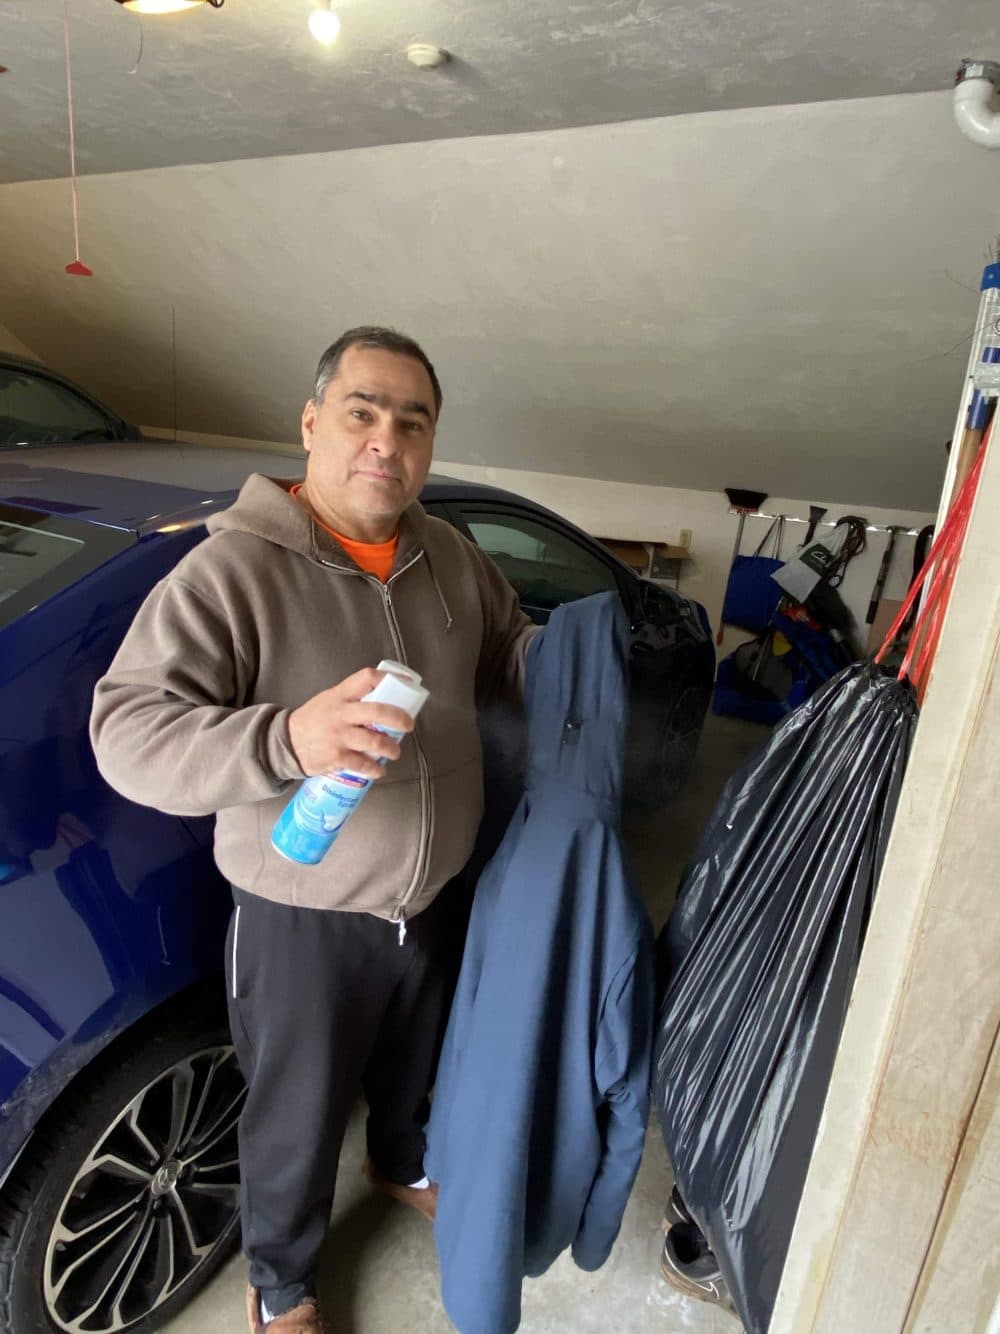 Jairo Suarez disinfects his car and changes in his garage every day he comes home from work (Courtesy Jairo Suarez)